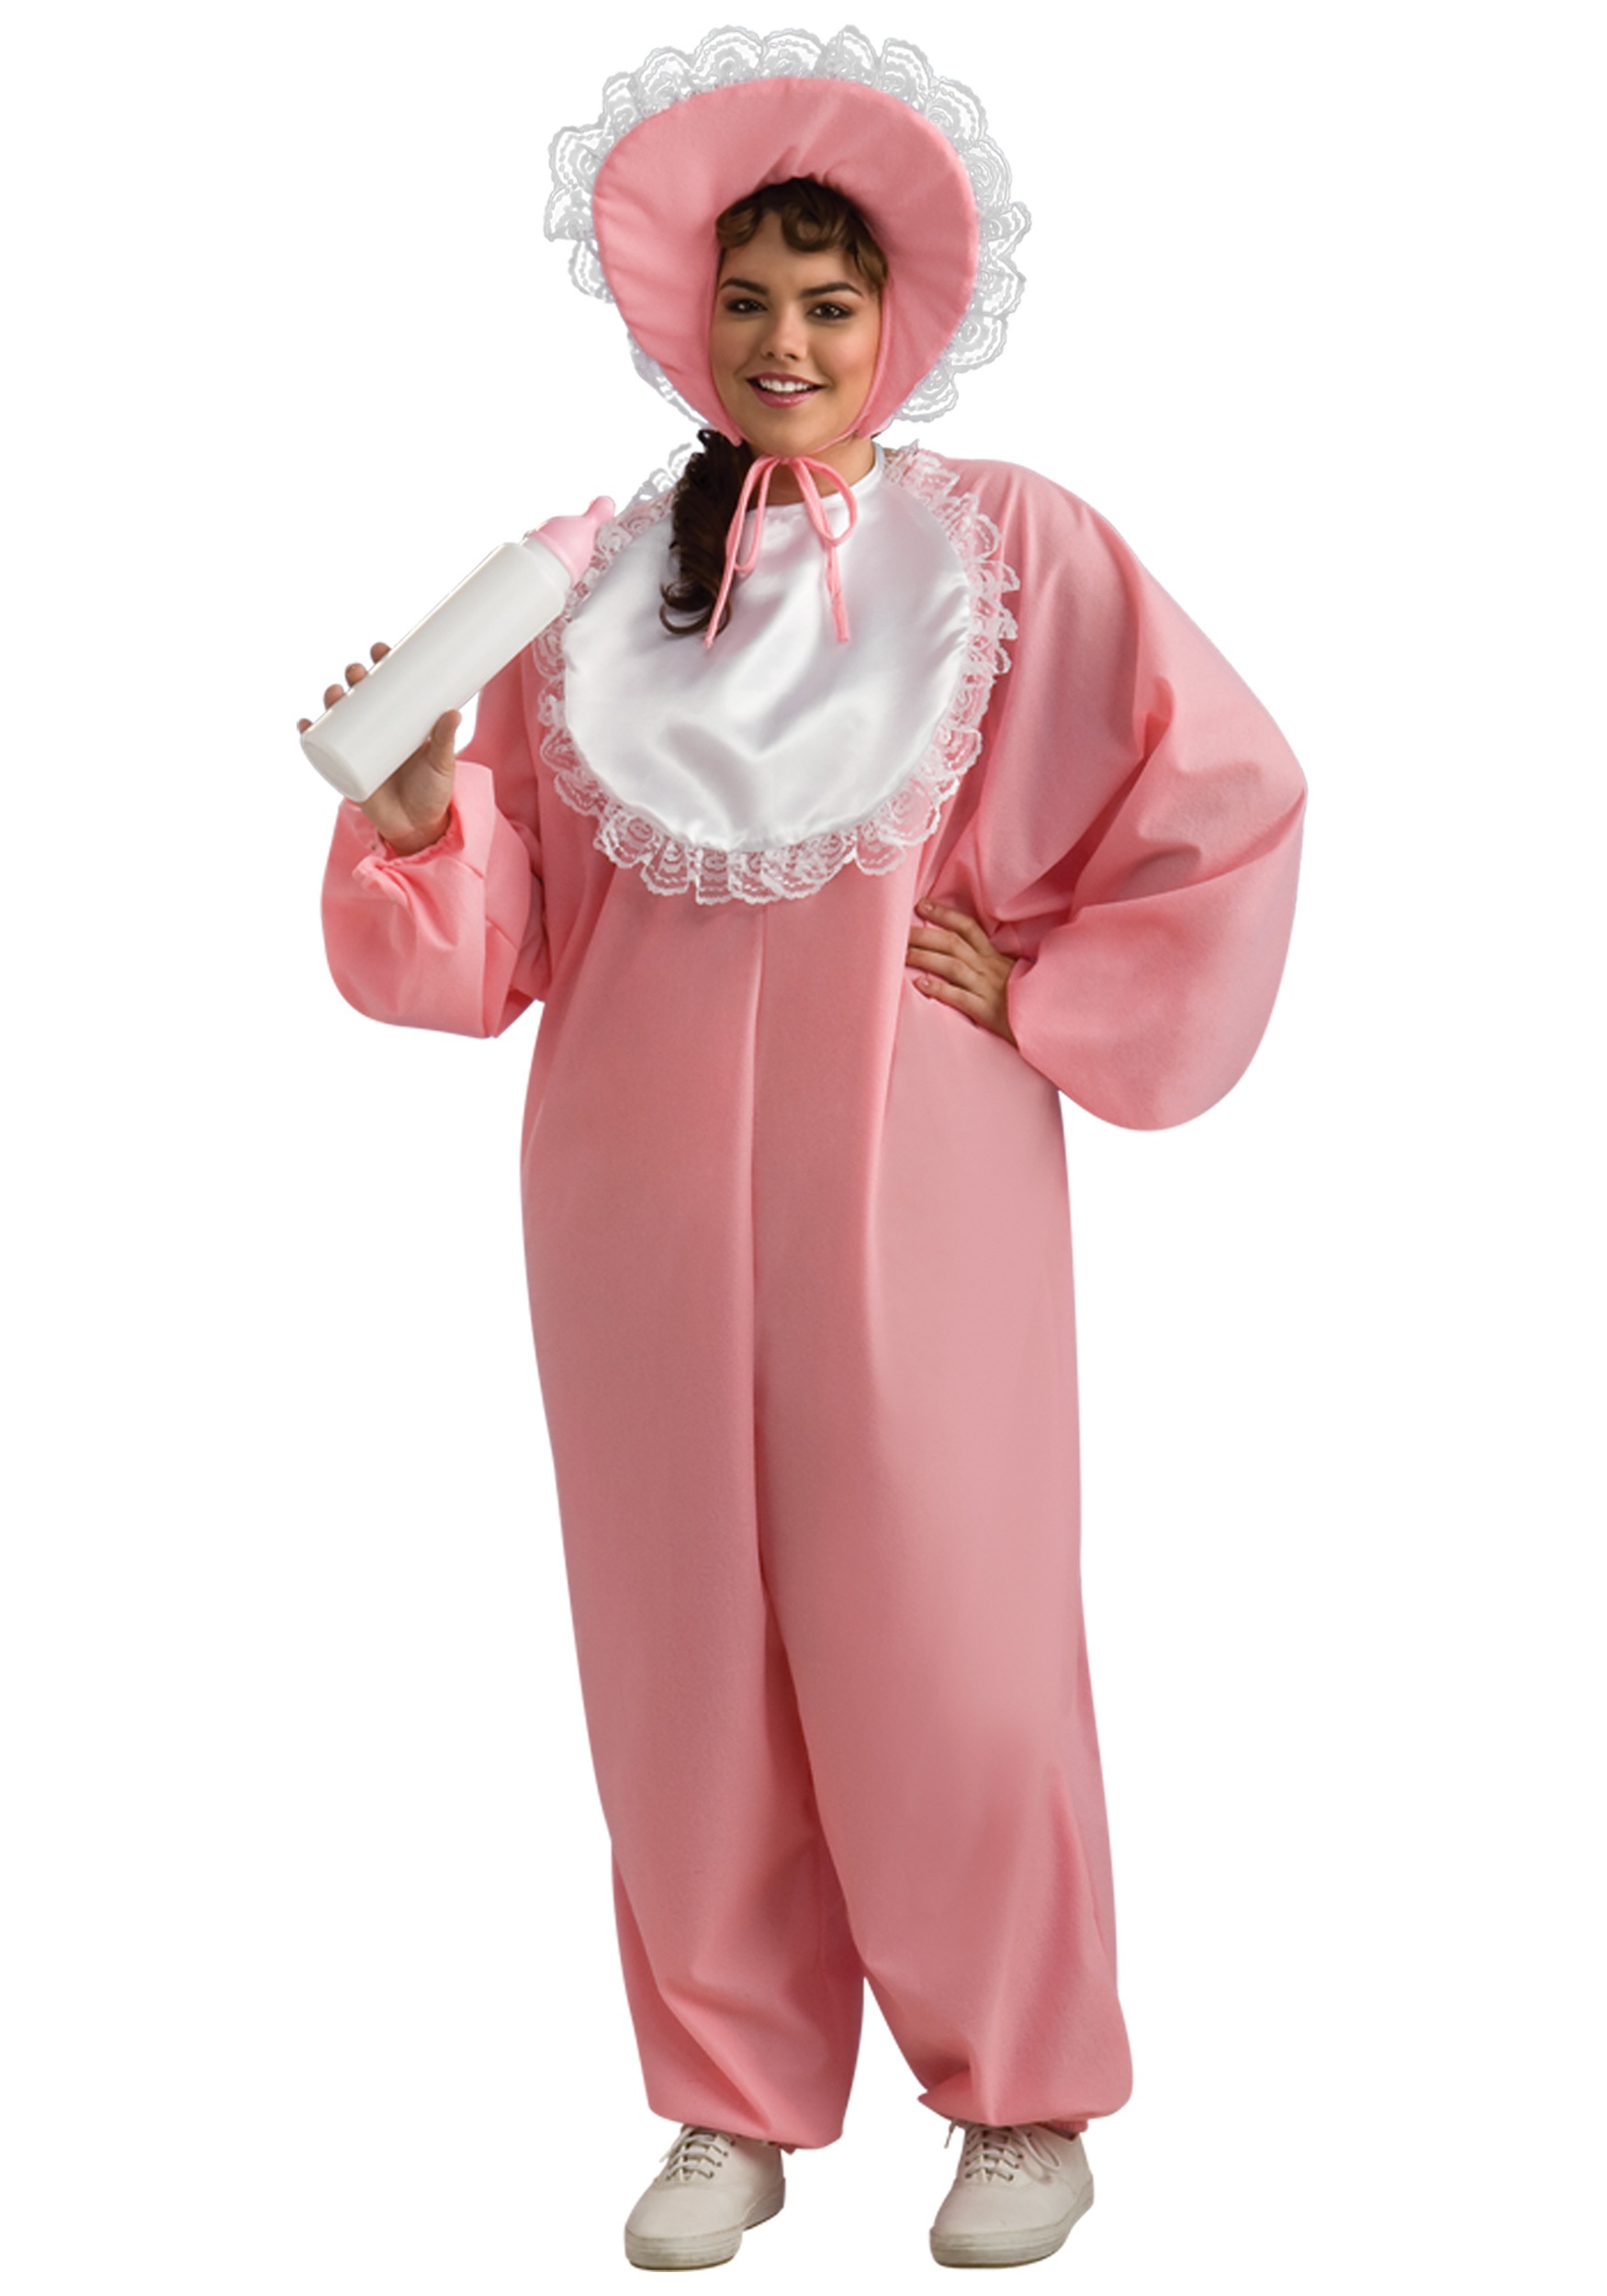 Adult Sized Costumes 95